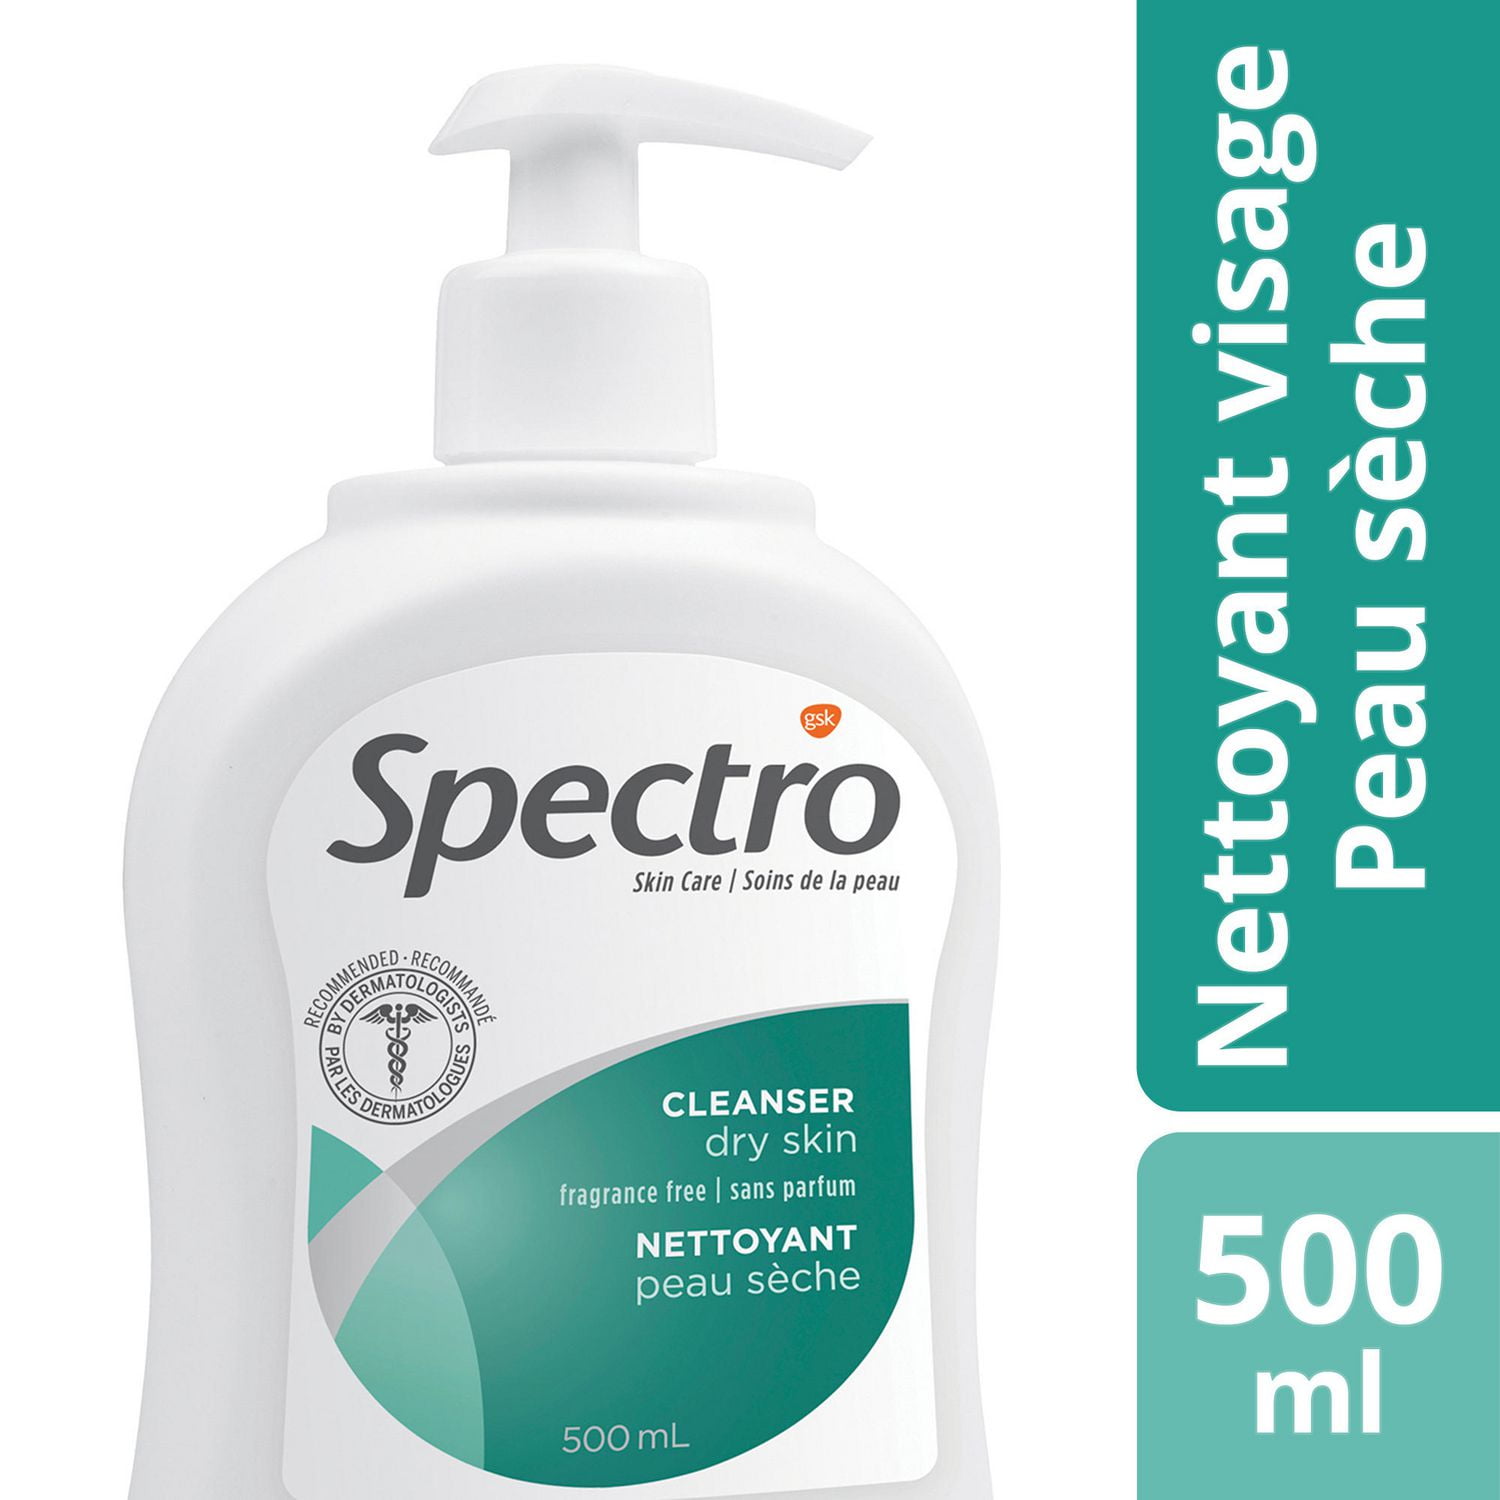 Spectro Jel Unscented 200ml Pump